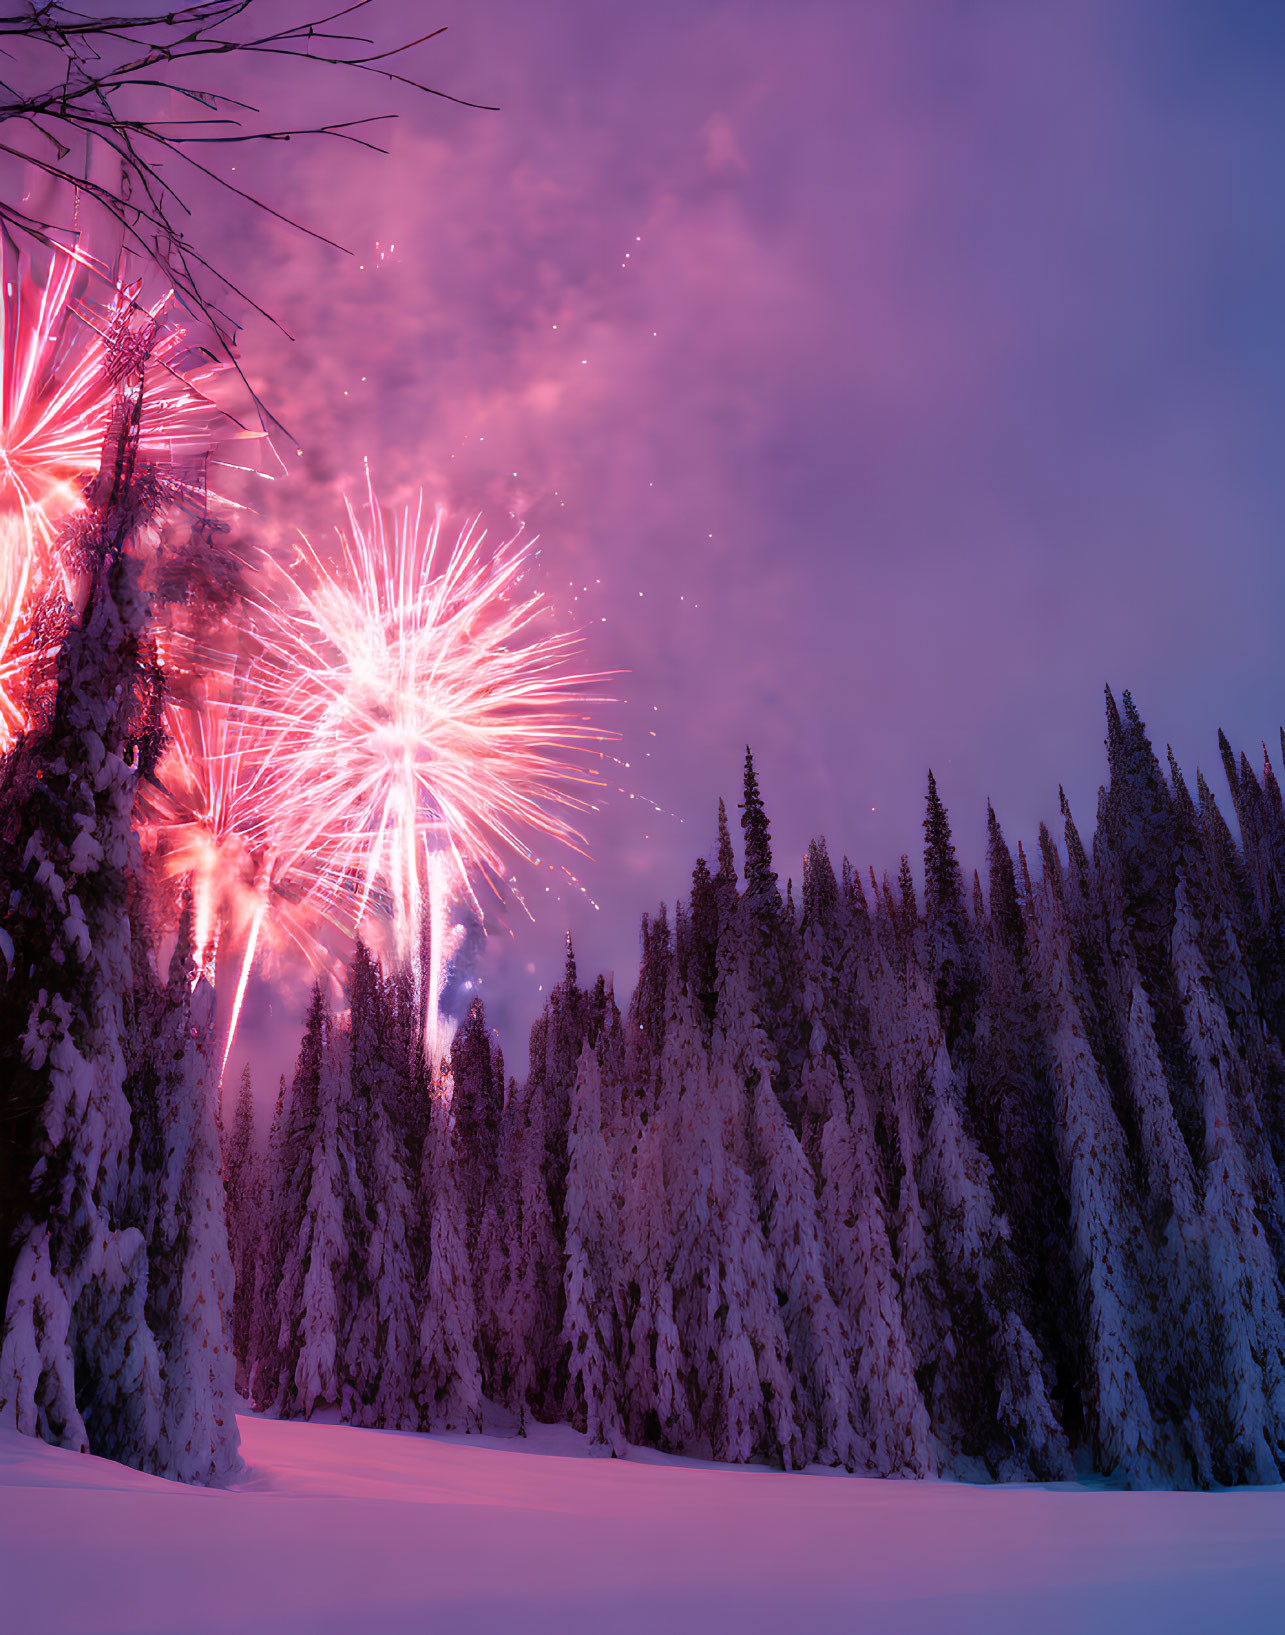 Vibrant fireworks light up purple sky over snowy pine forest